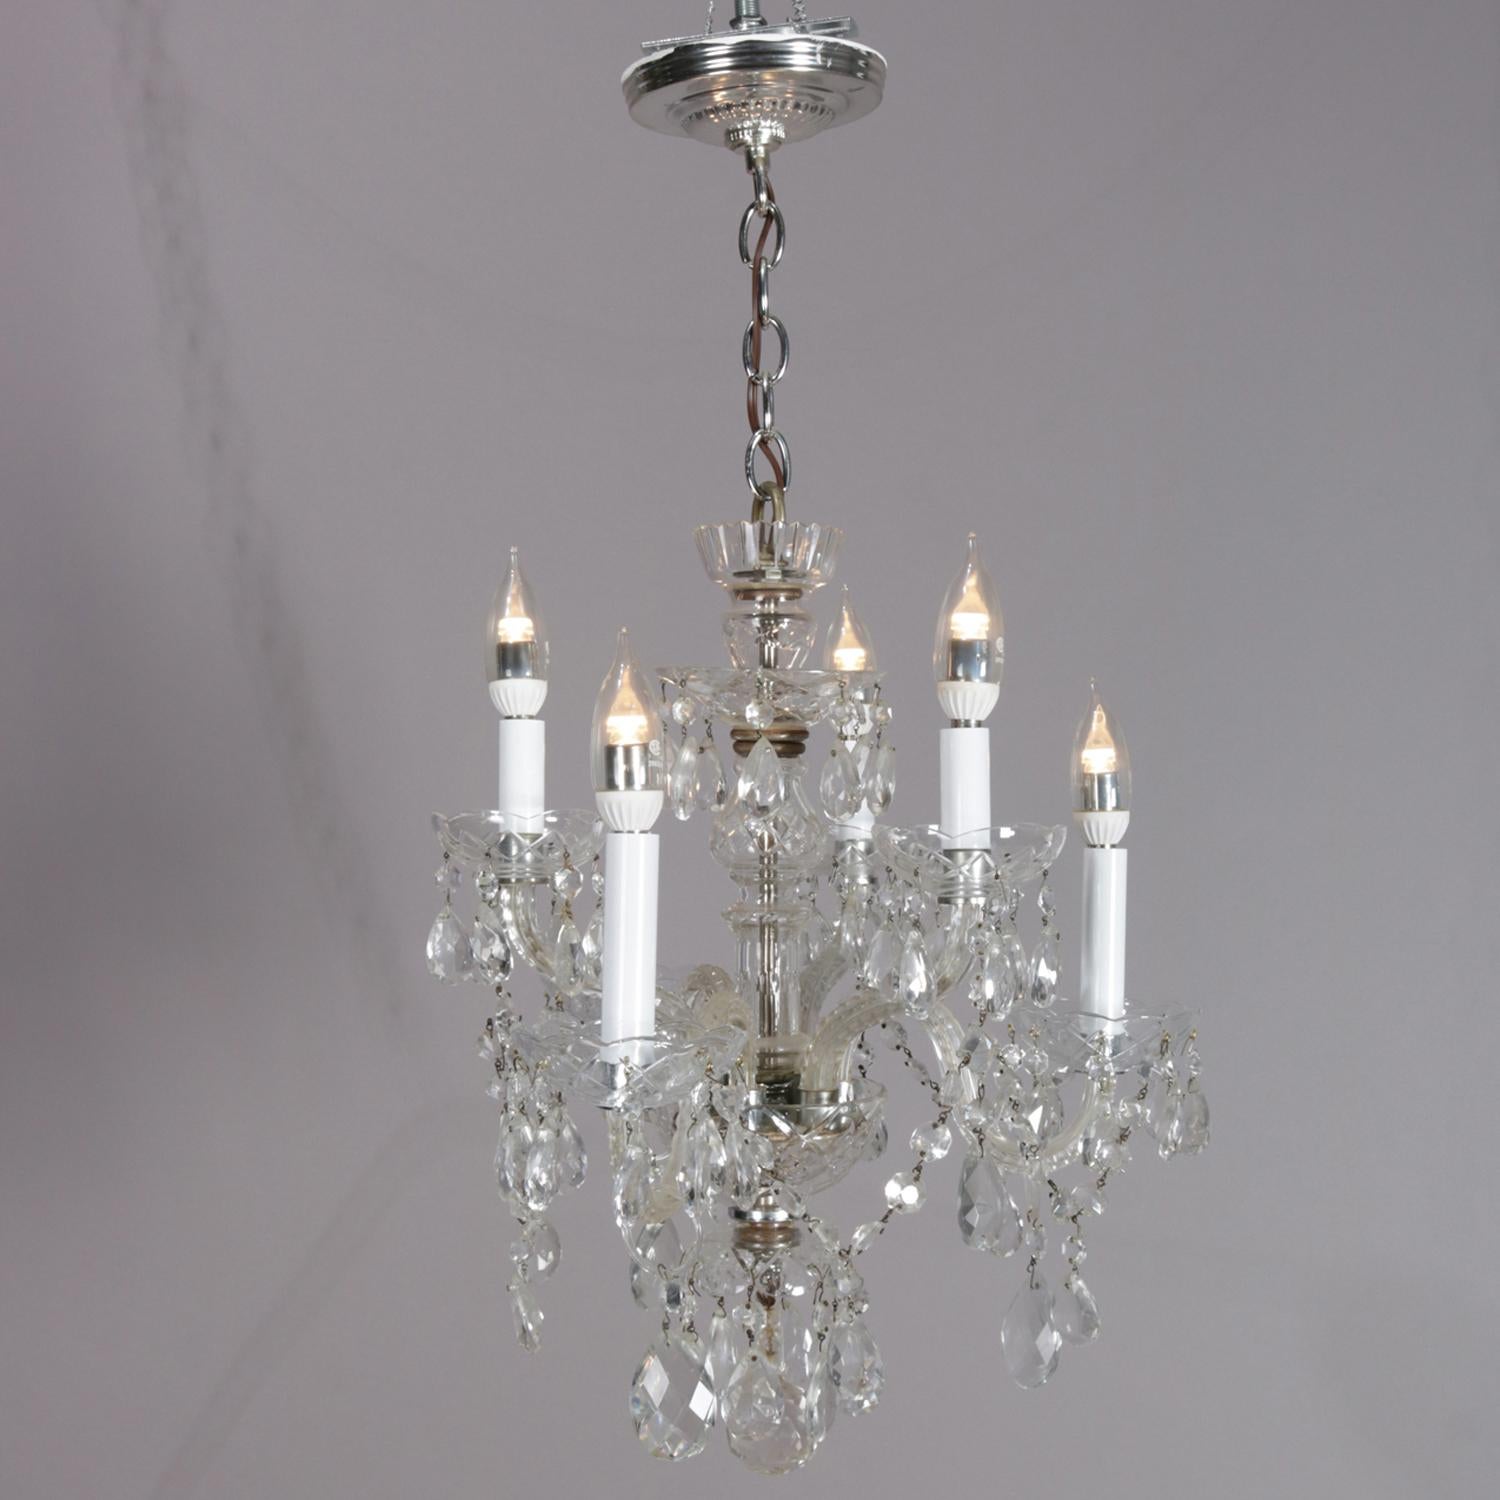 Italian petite chandelier features chrome frame with crystal body having six S-scroll glass arms terminating in candle lights, all-over highlighted with strung and hanging cut crystal prisms, professionally re-wired, circa 1940

Measures: 30